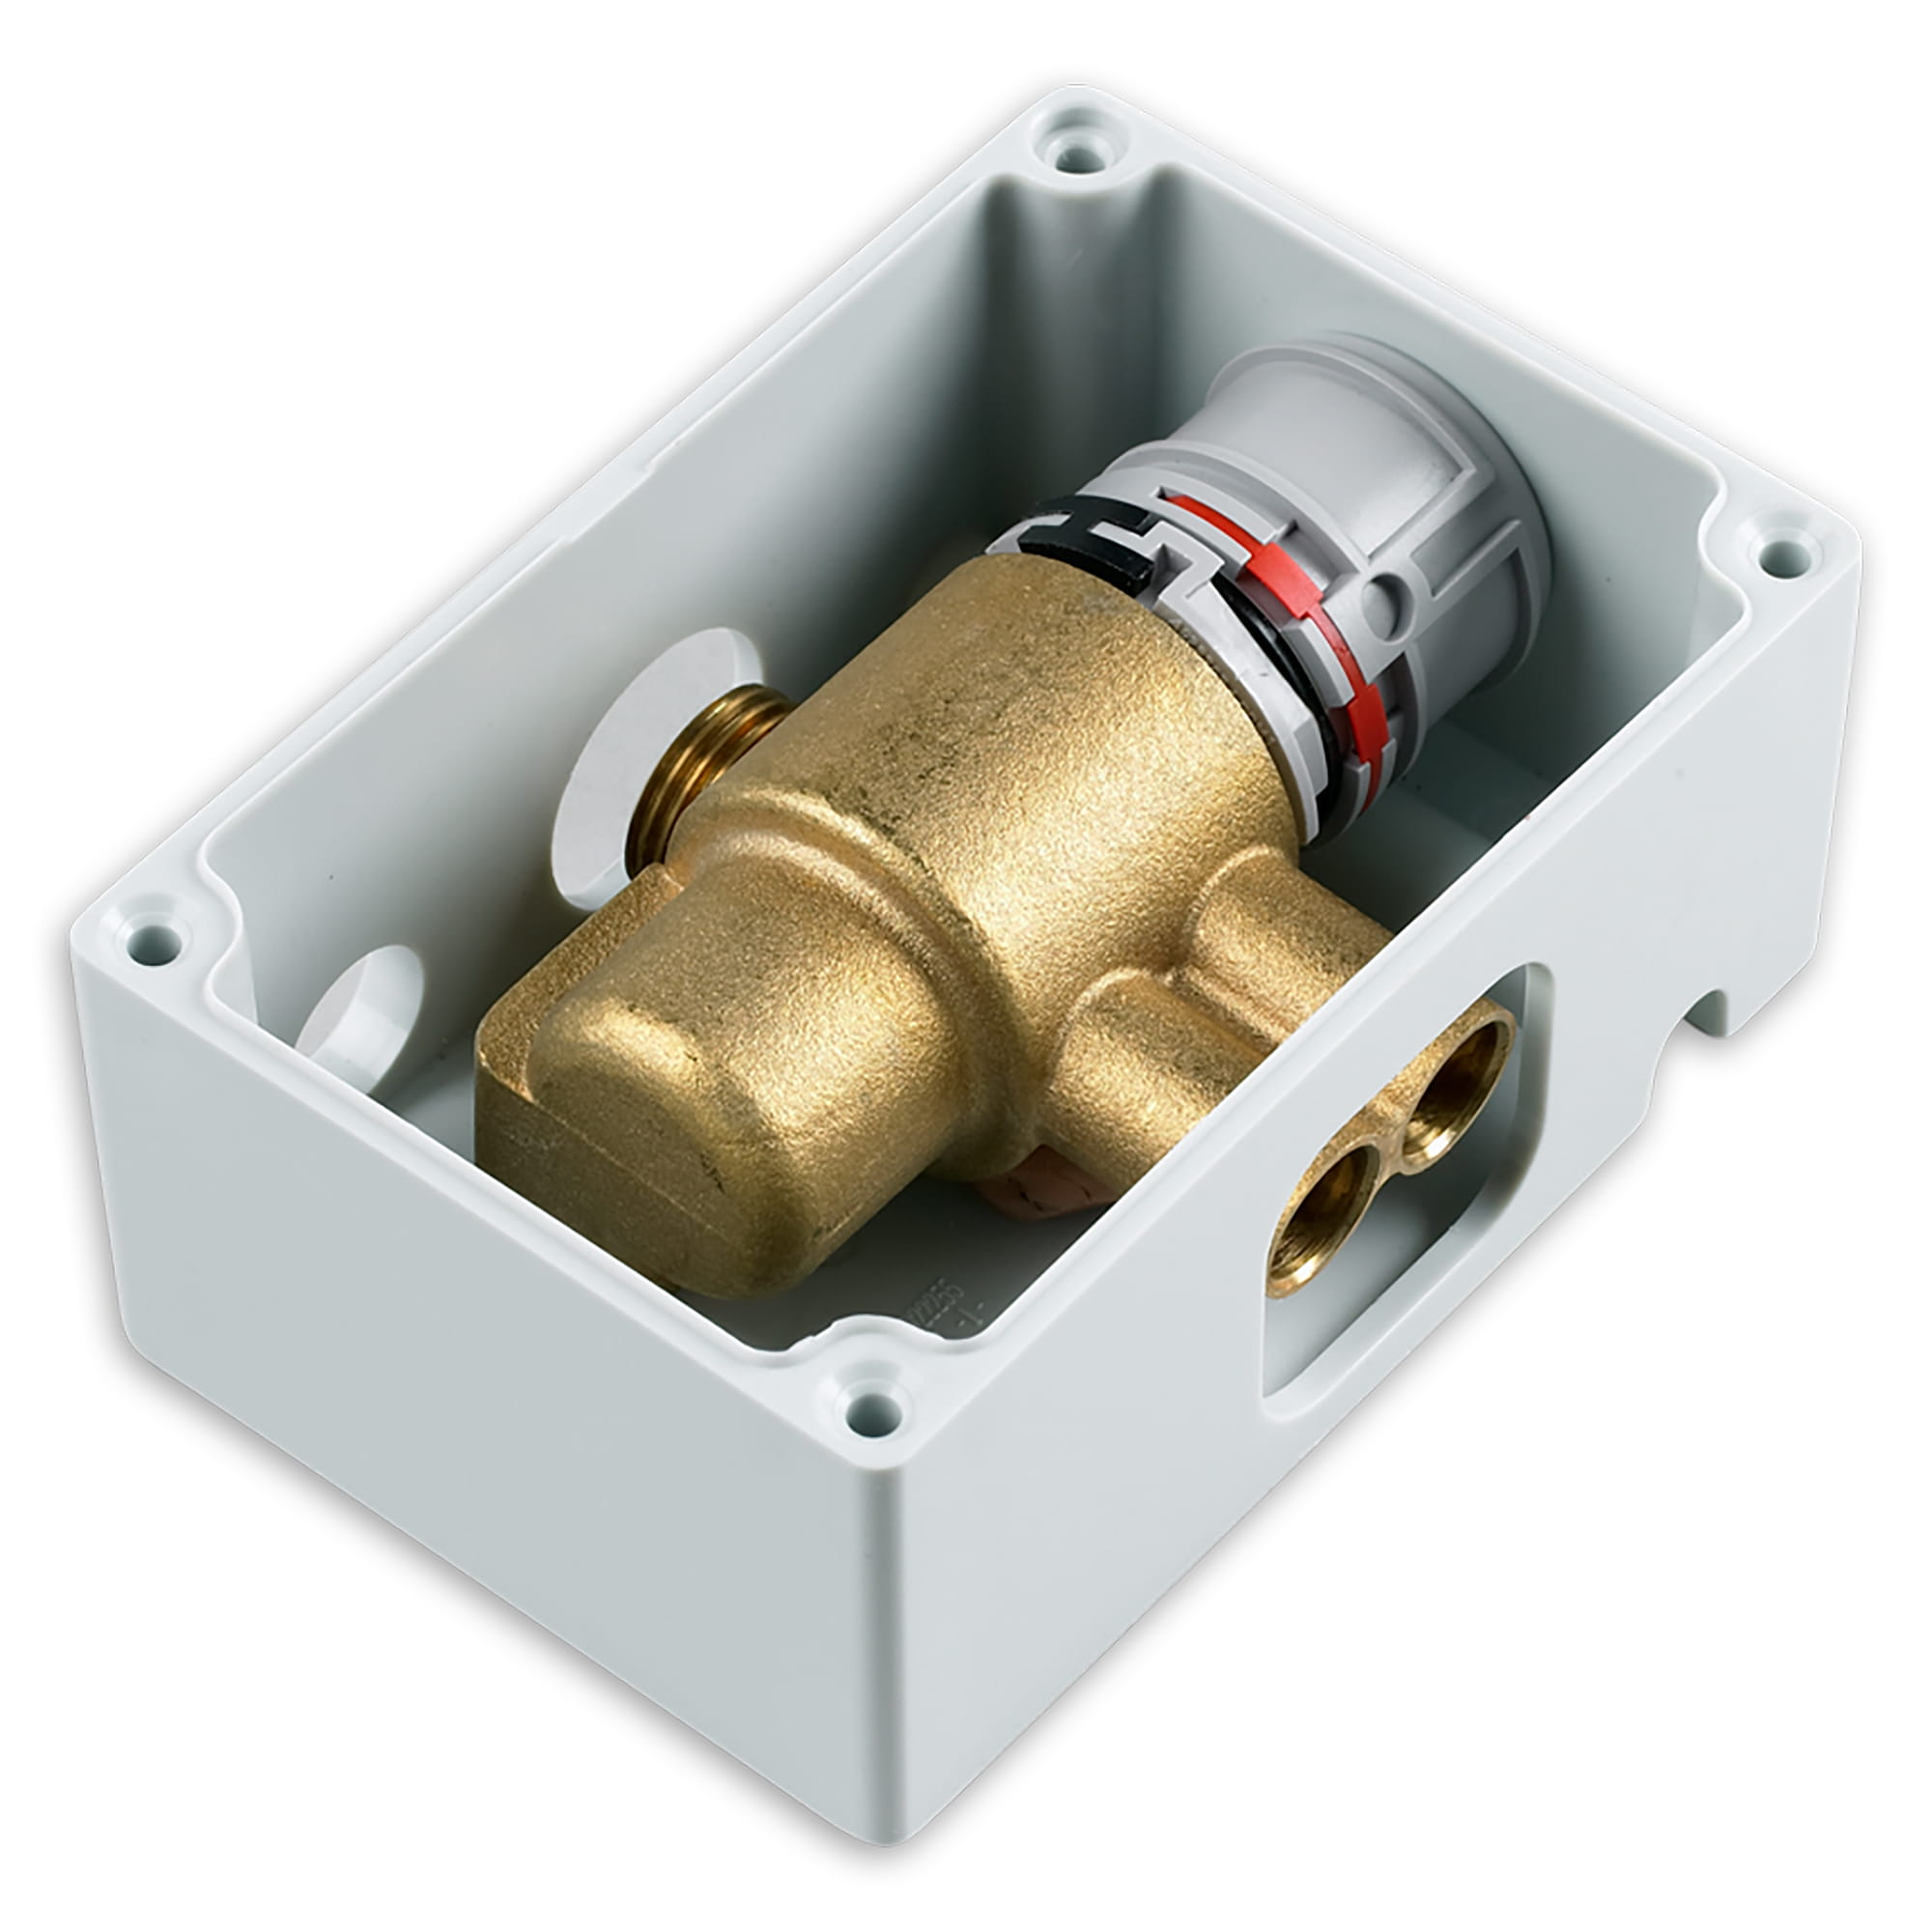 Selectronic Thermostatic Mixing Valve, ASSE 1070 Certified